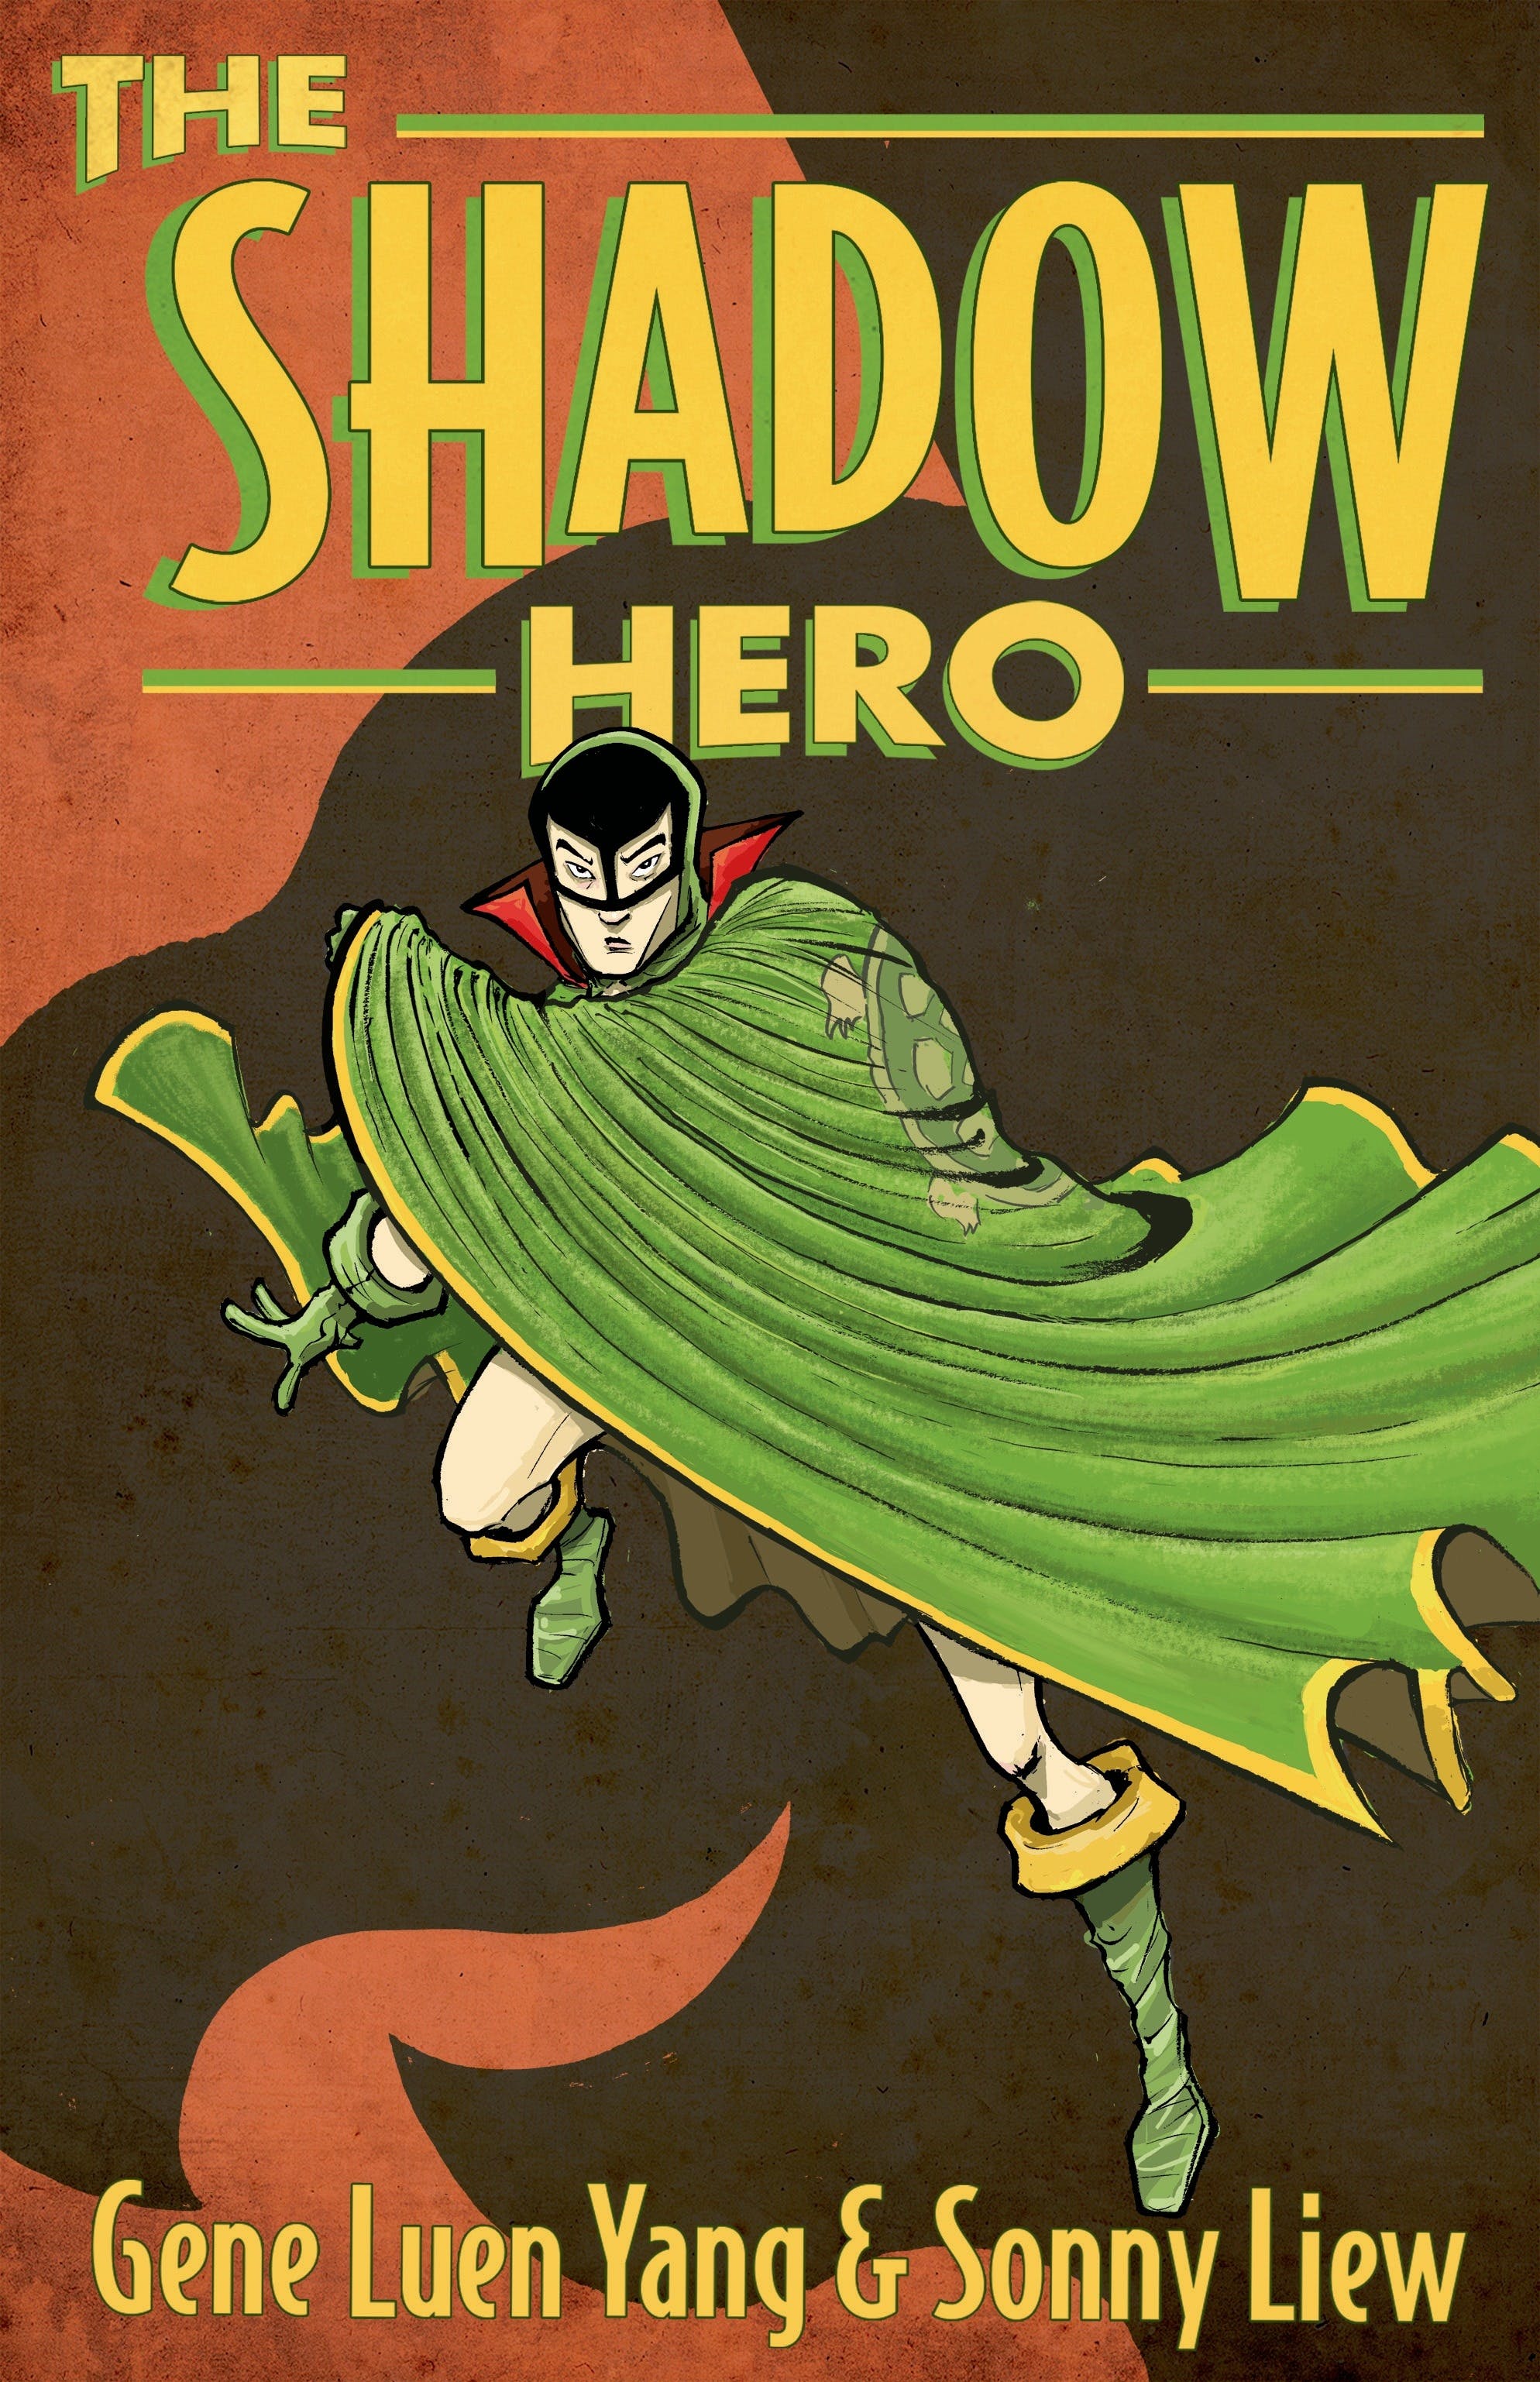 Cover of the Shadow Hero featuring teh green turtle